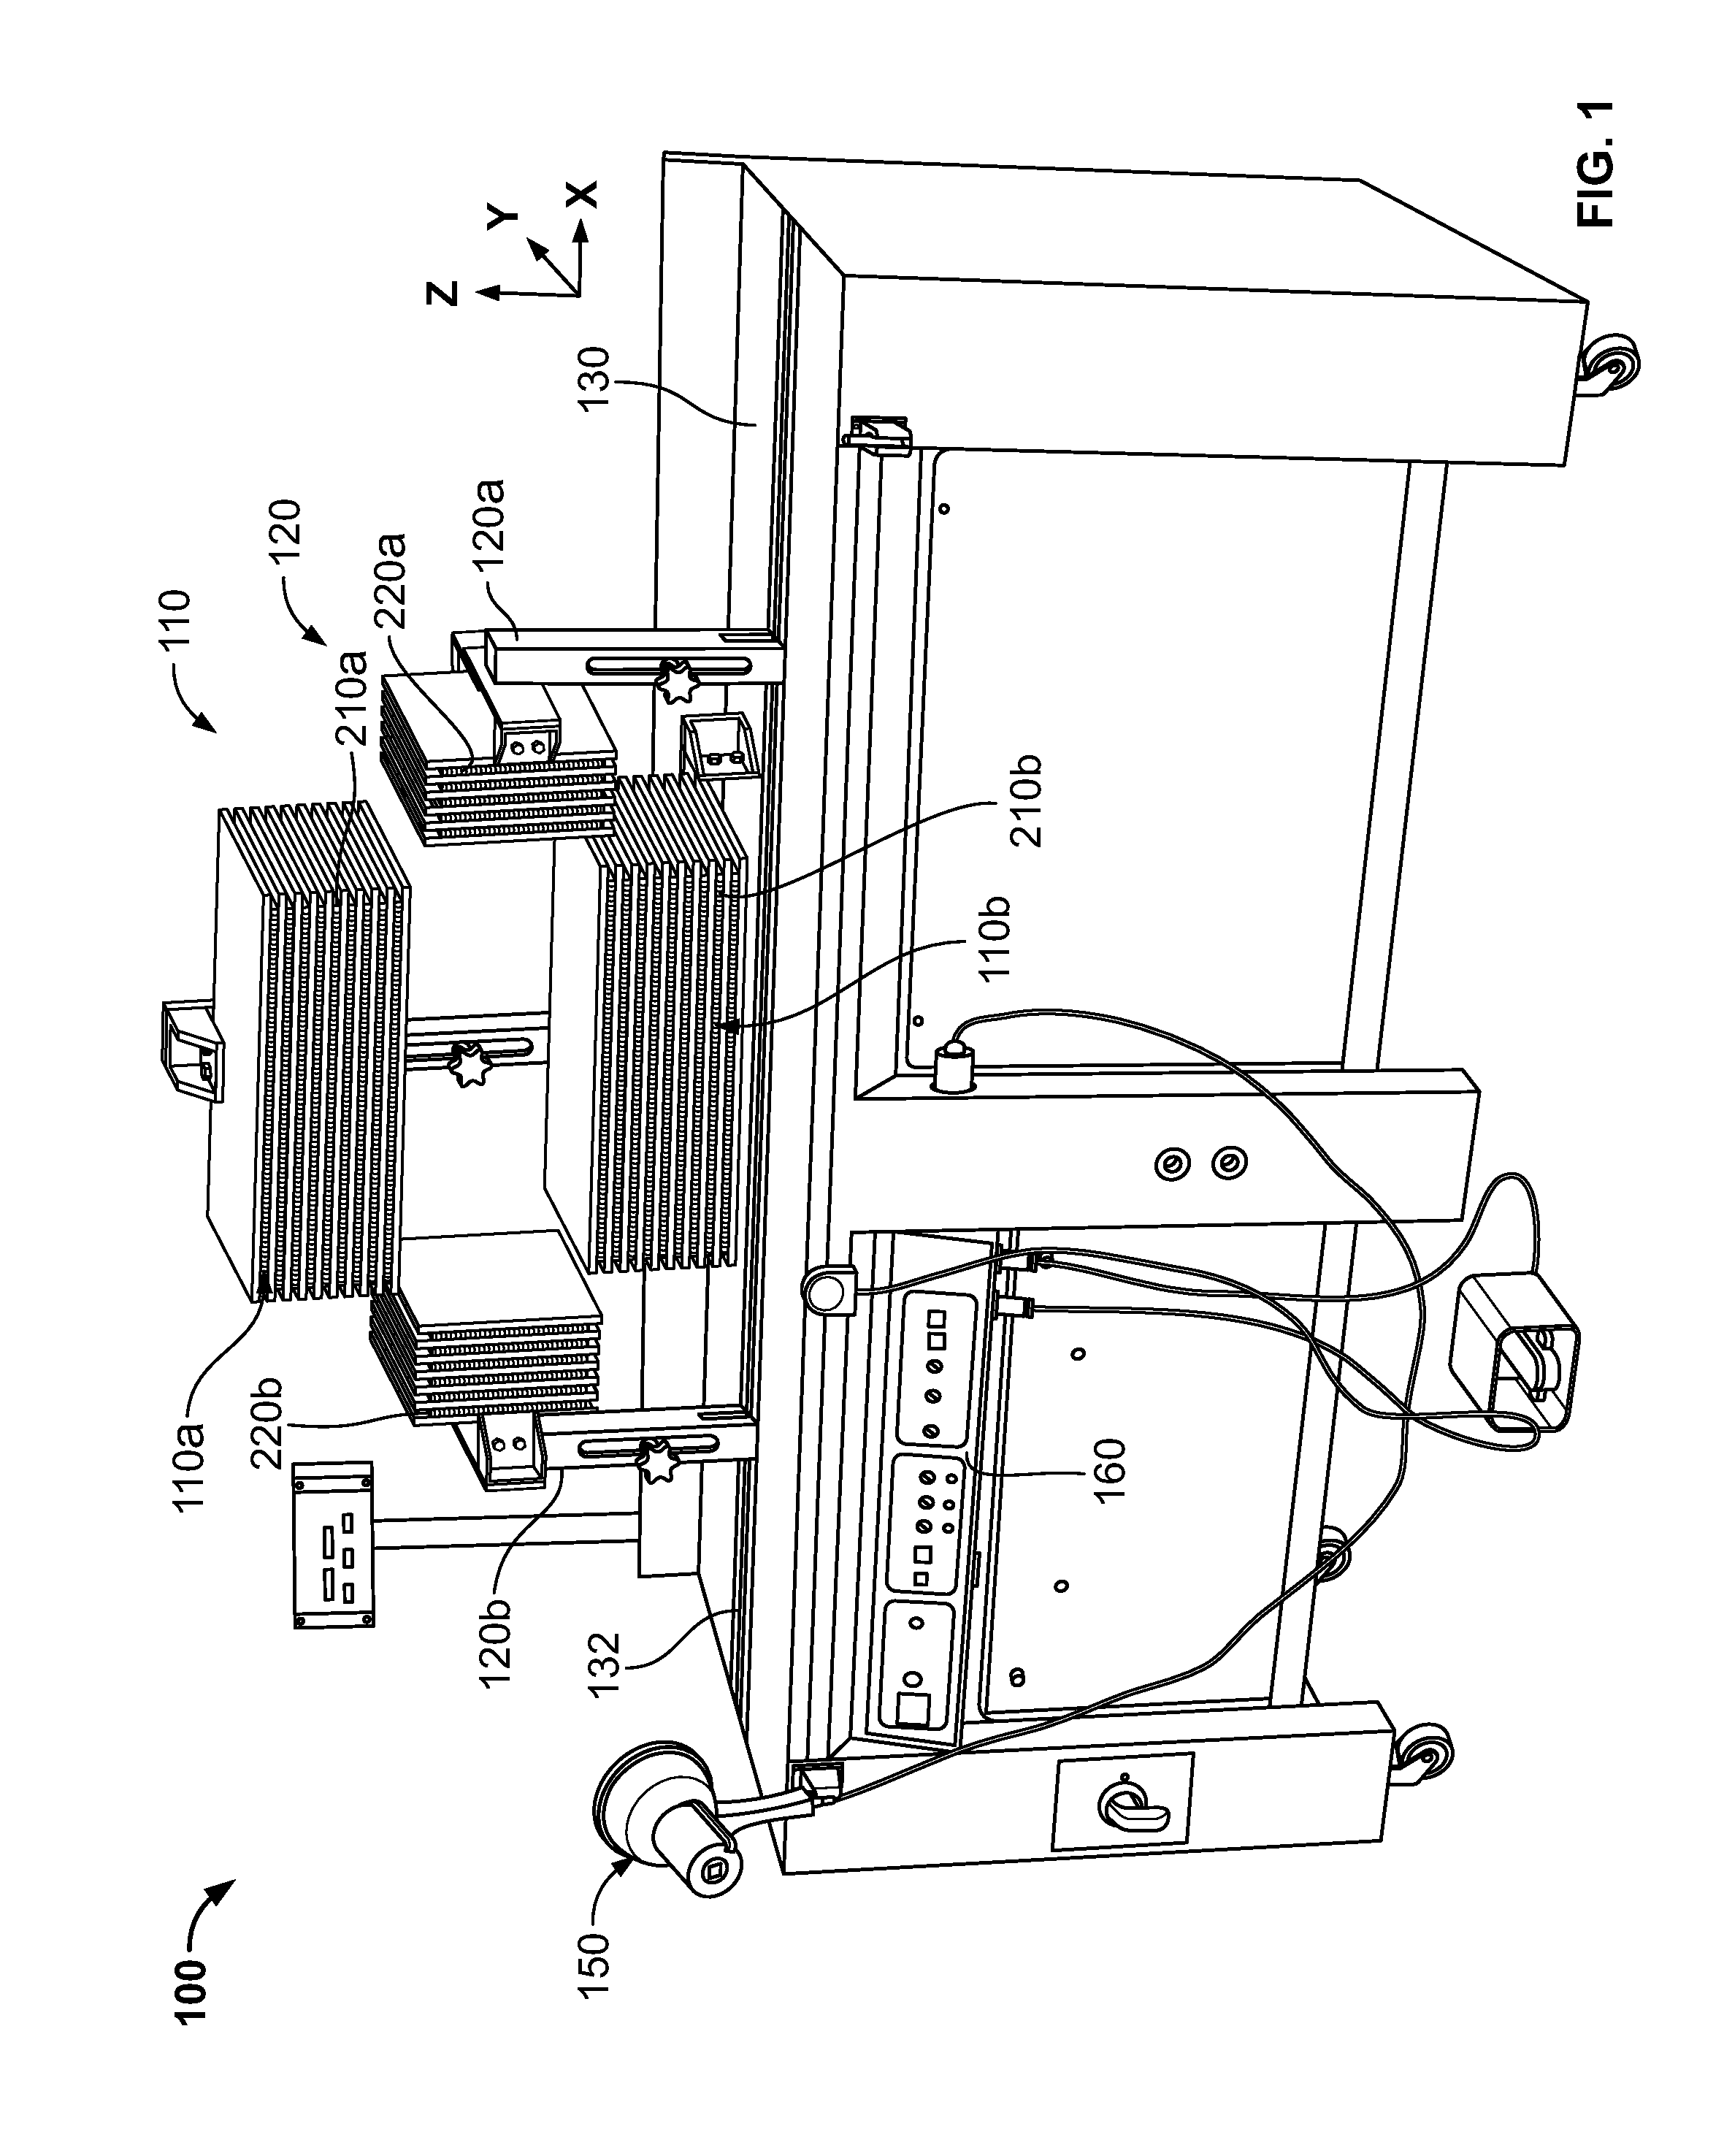 Magnetic particle inspection apparatus and method